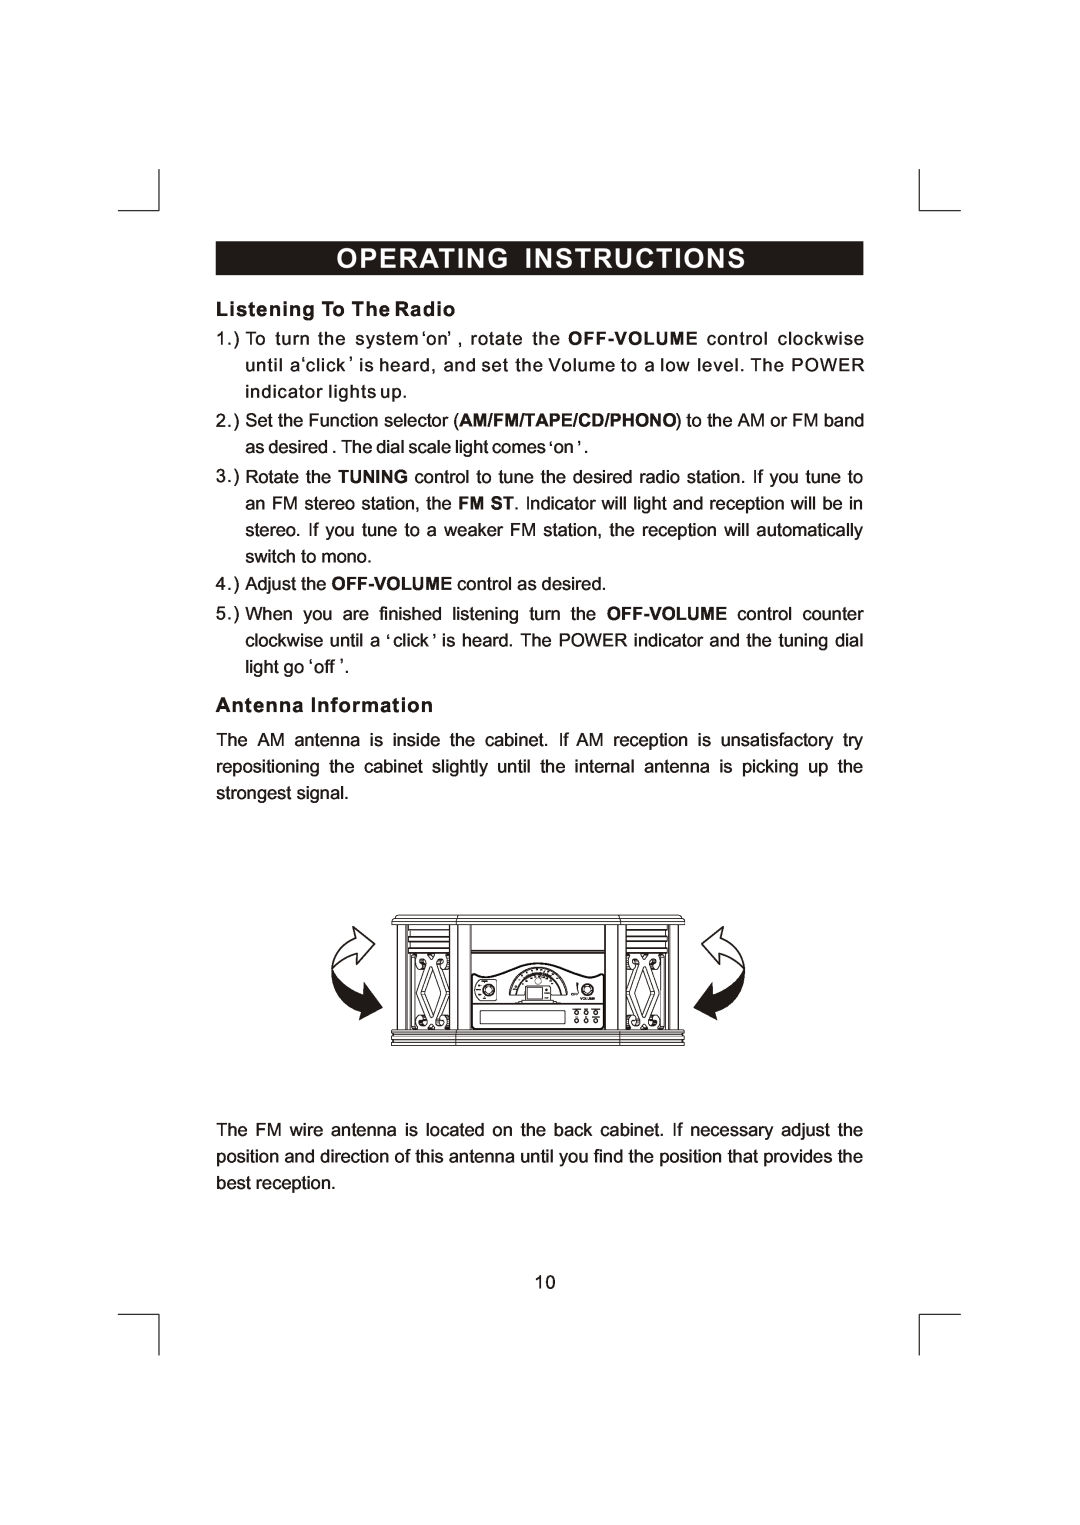 Emerson NR303TTC owner manual Operating Instructions, Listening To The Radio, Antenna Information 